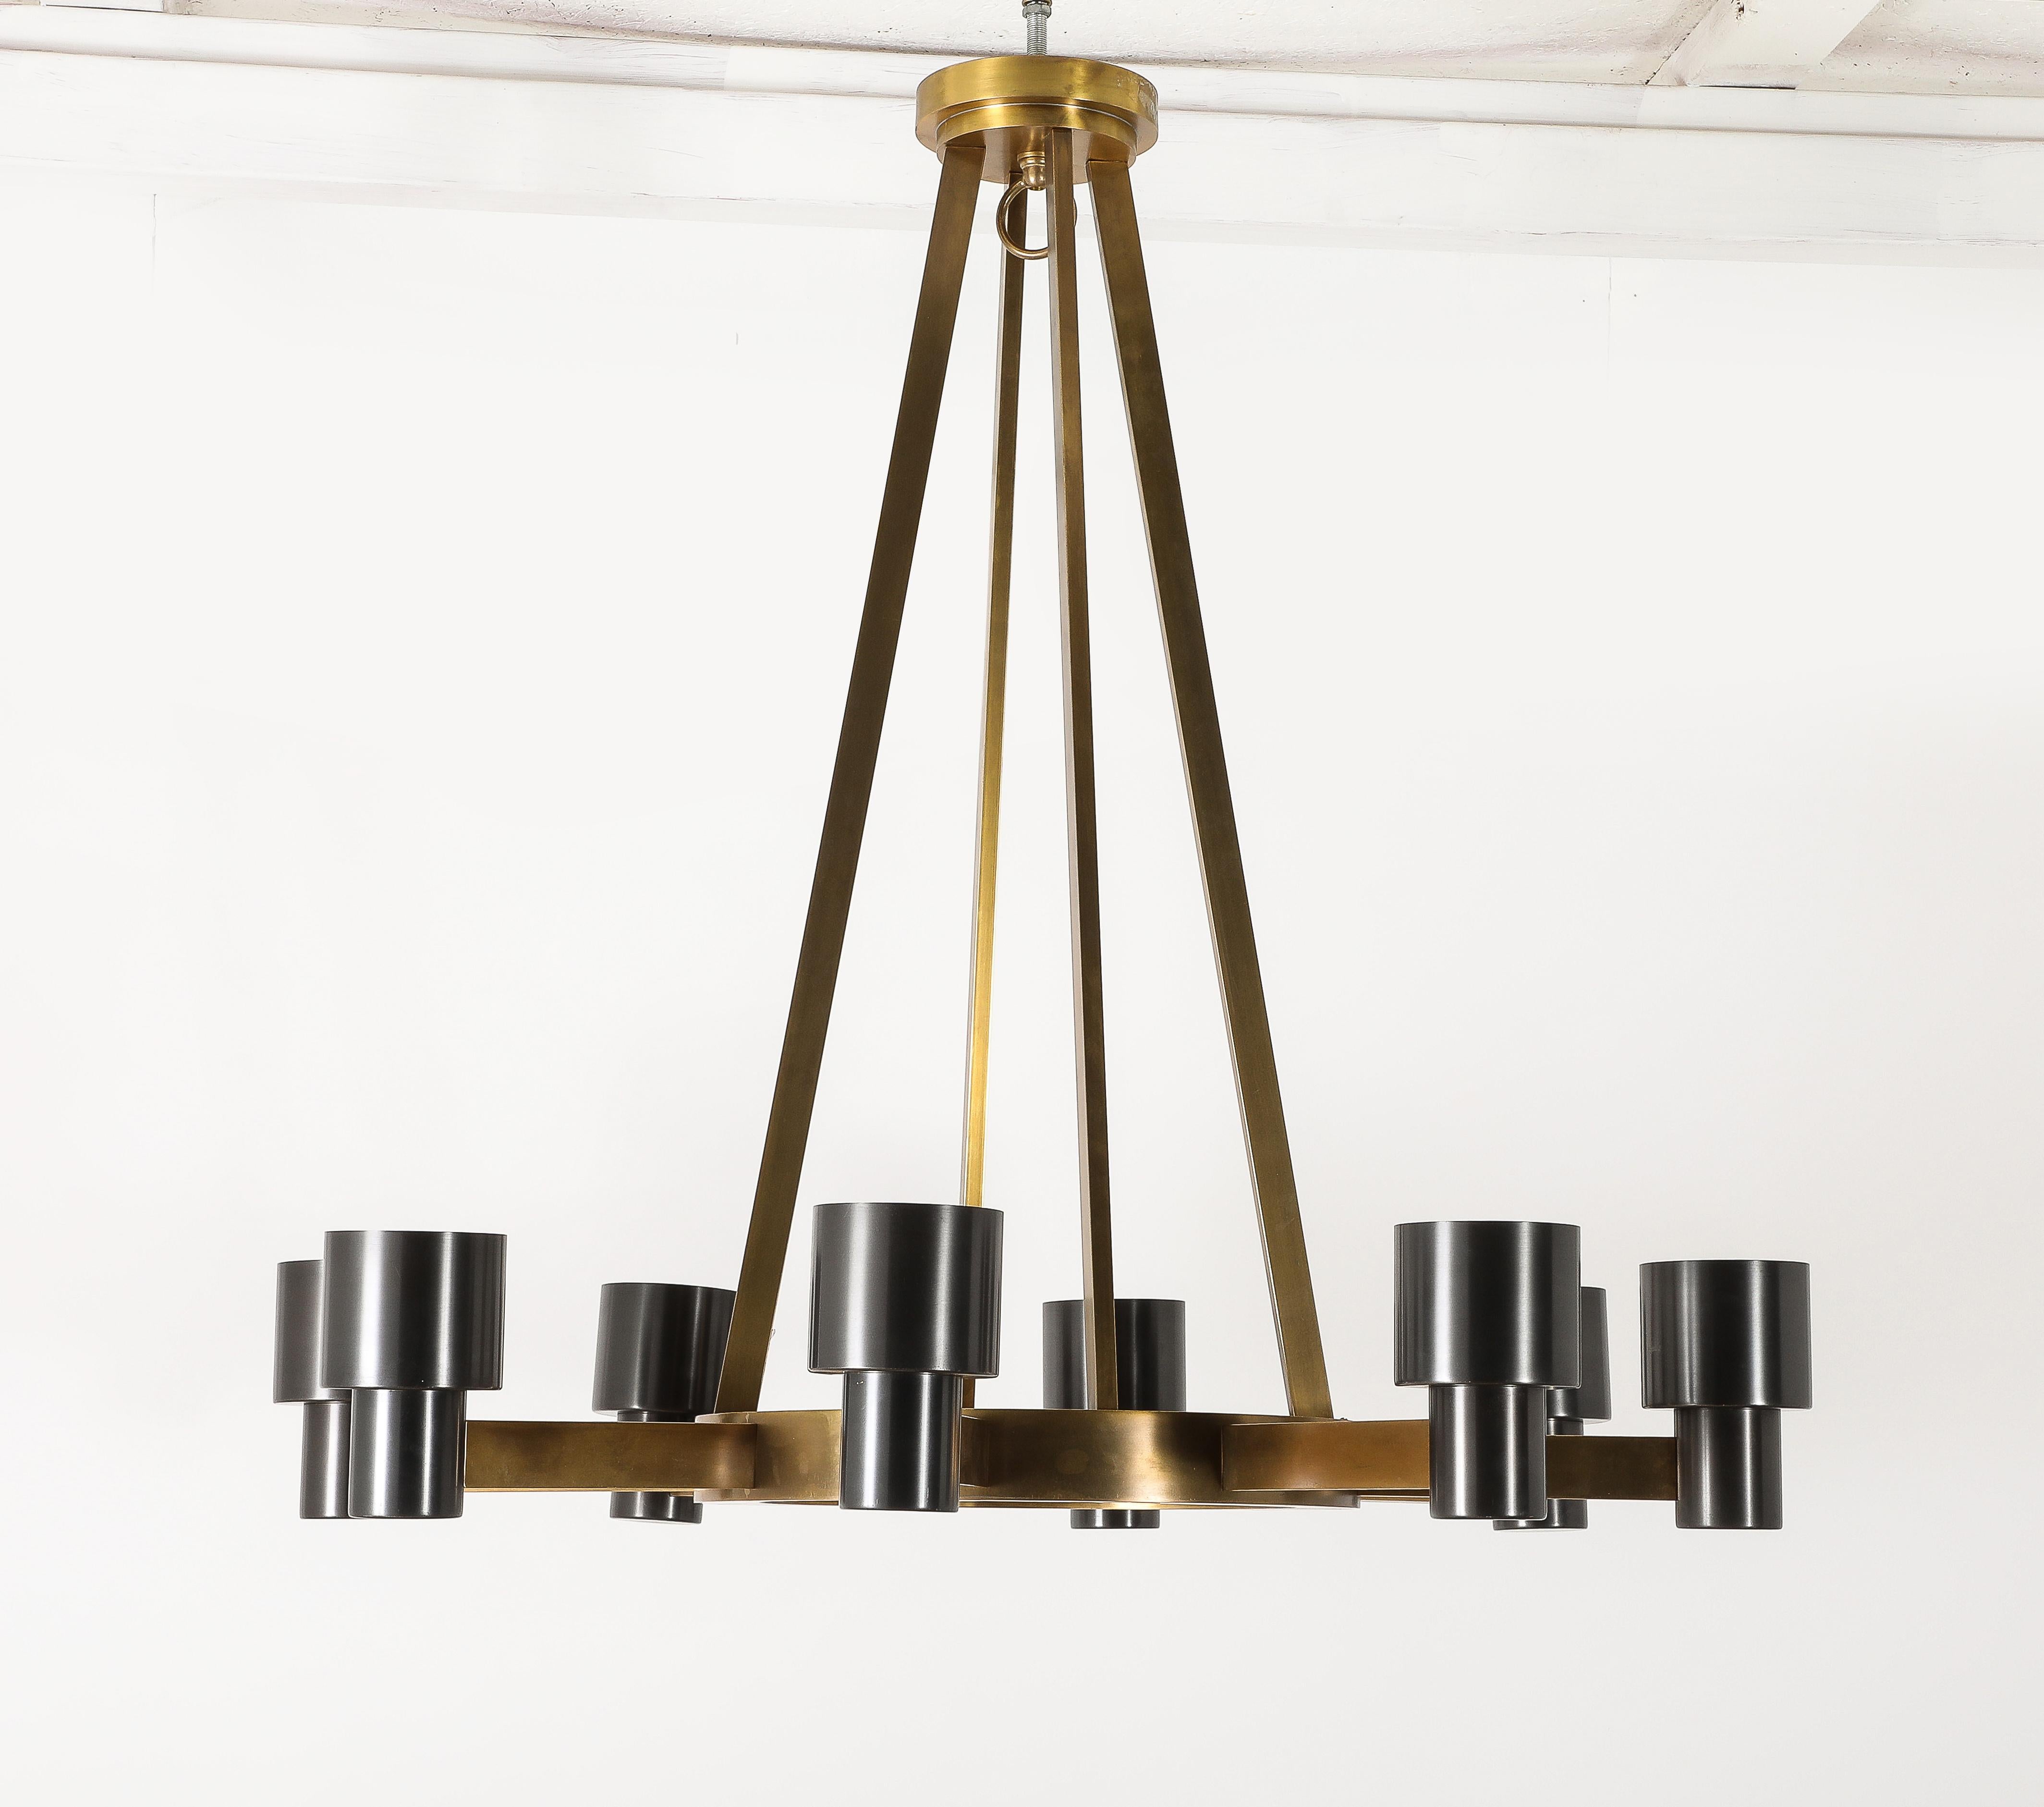 Mixed Metal Brutalist Mid-Century Chandelier Custom Reproduction, USA 2018 For Sale 1